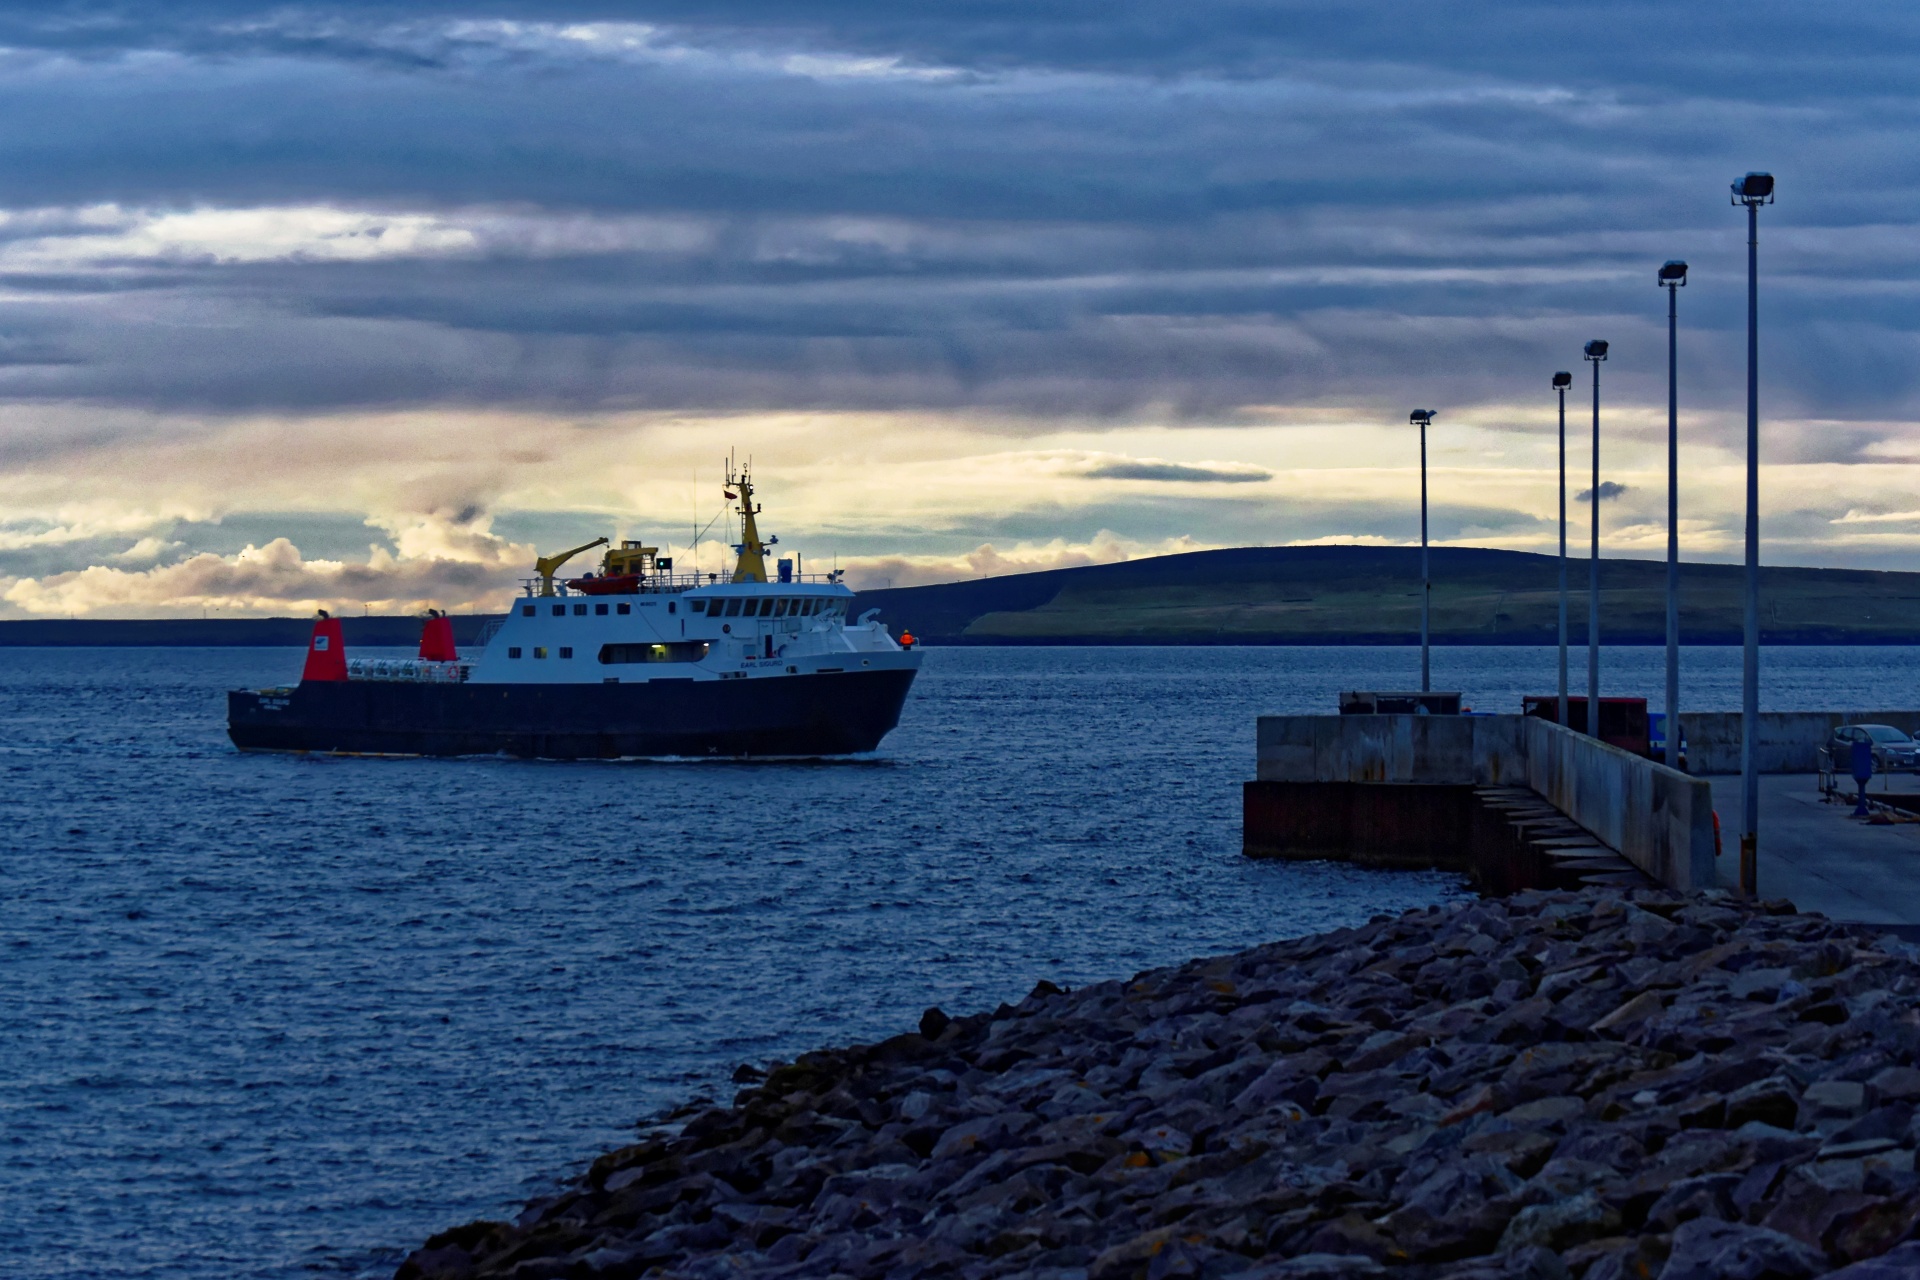 Ferry coming in to port at dusk with the light fading